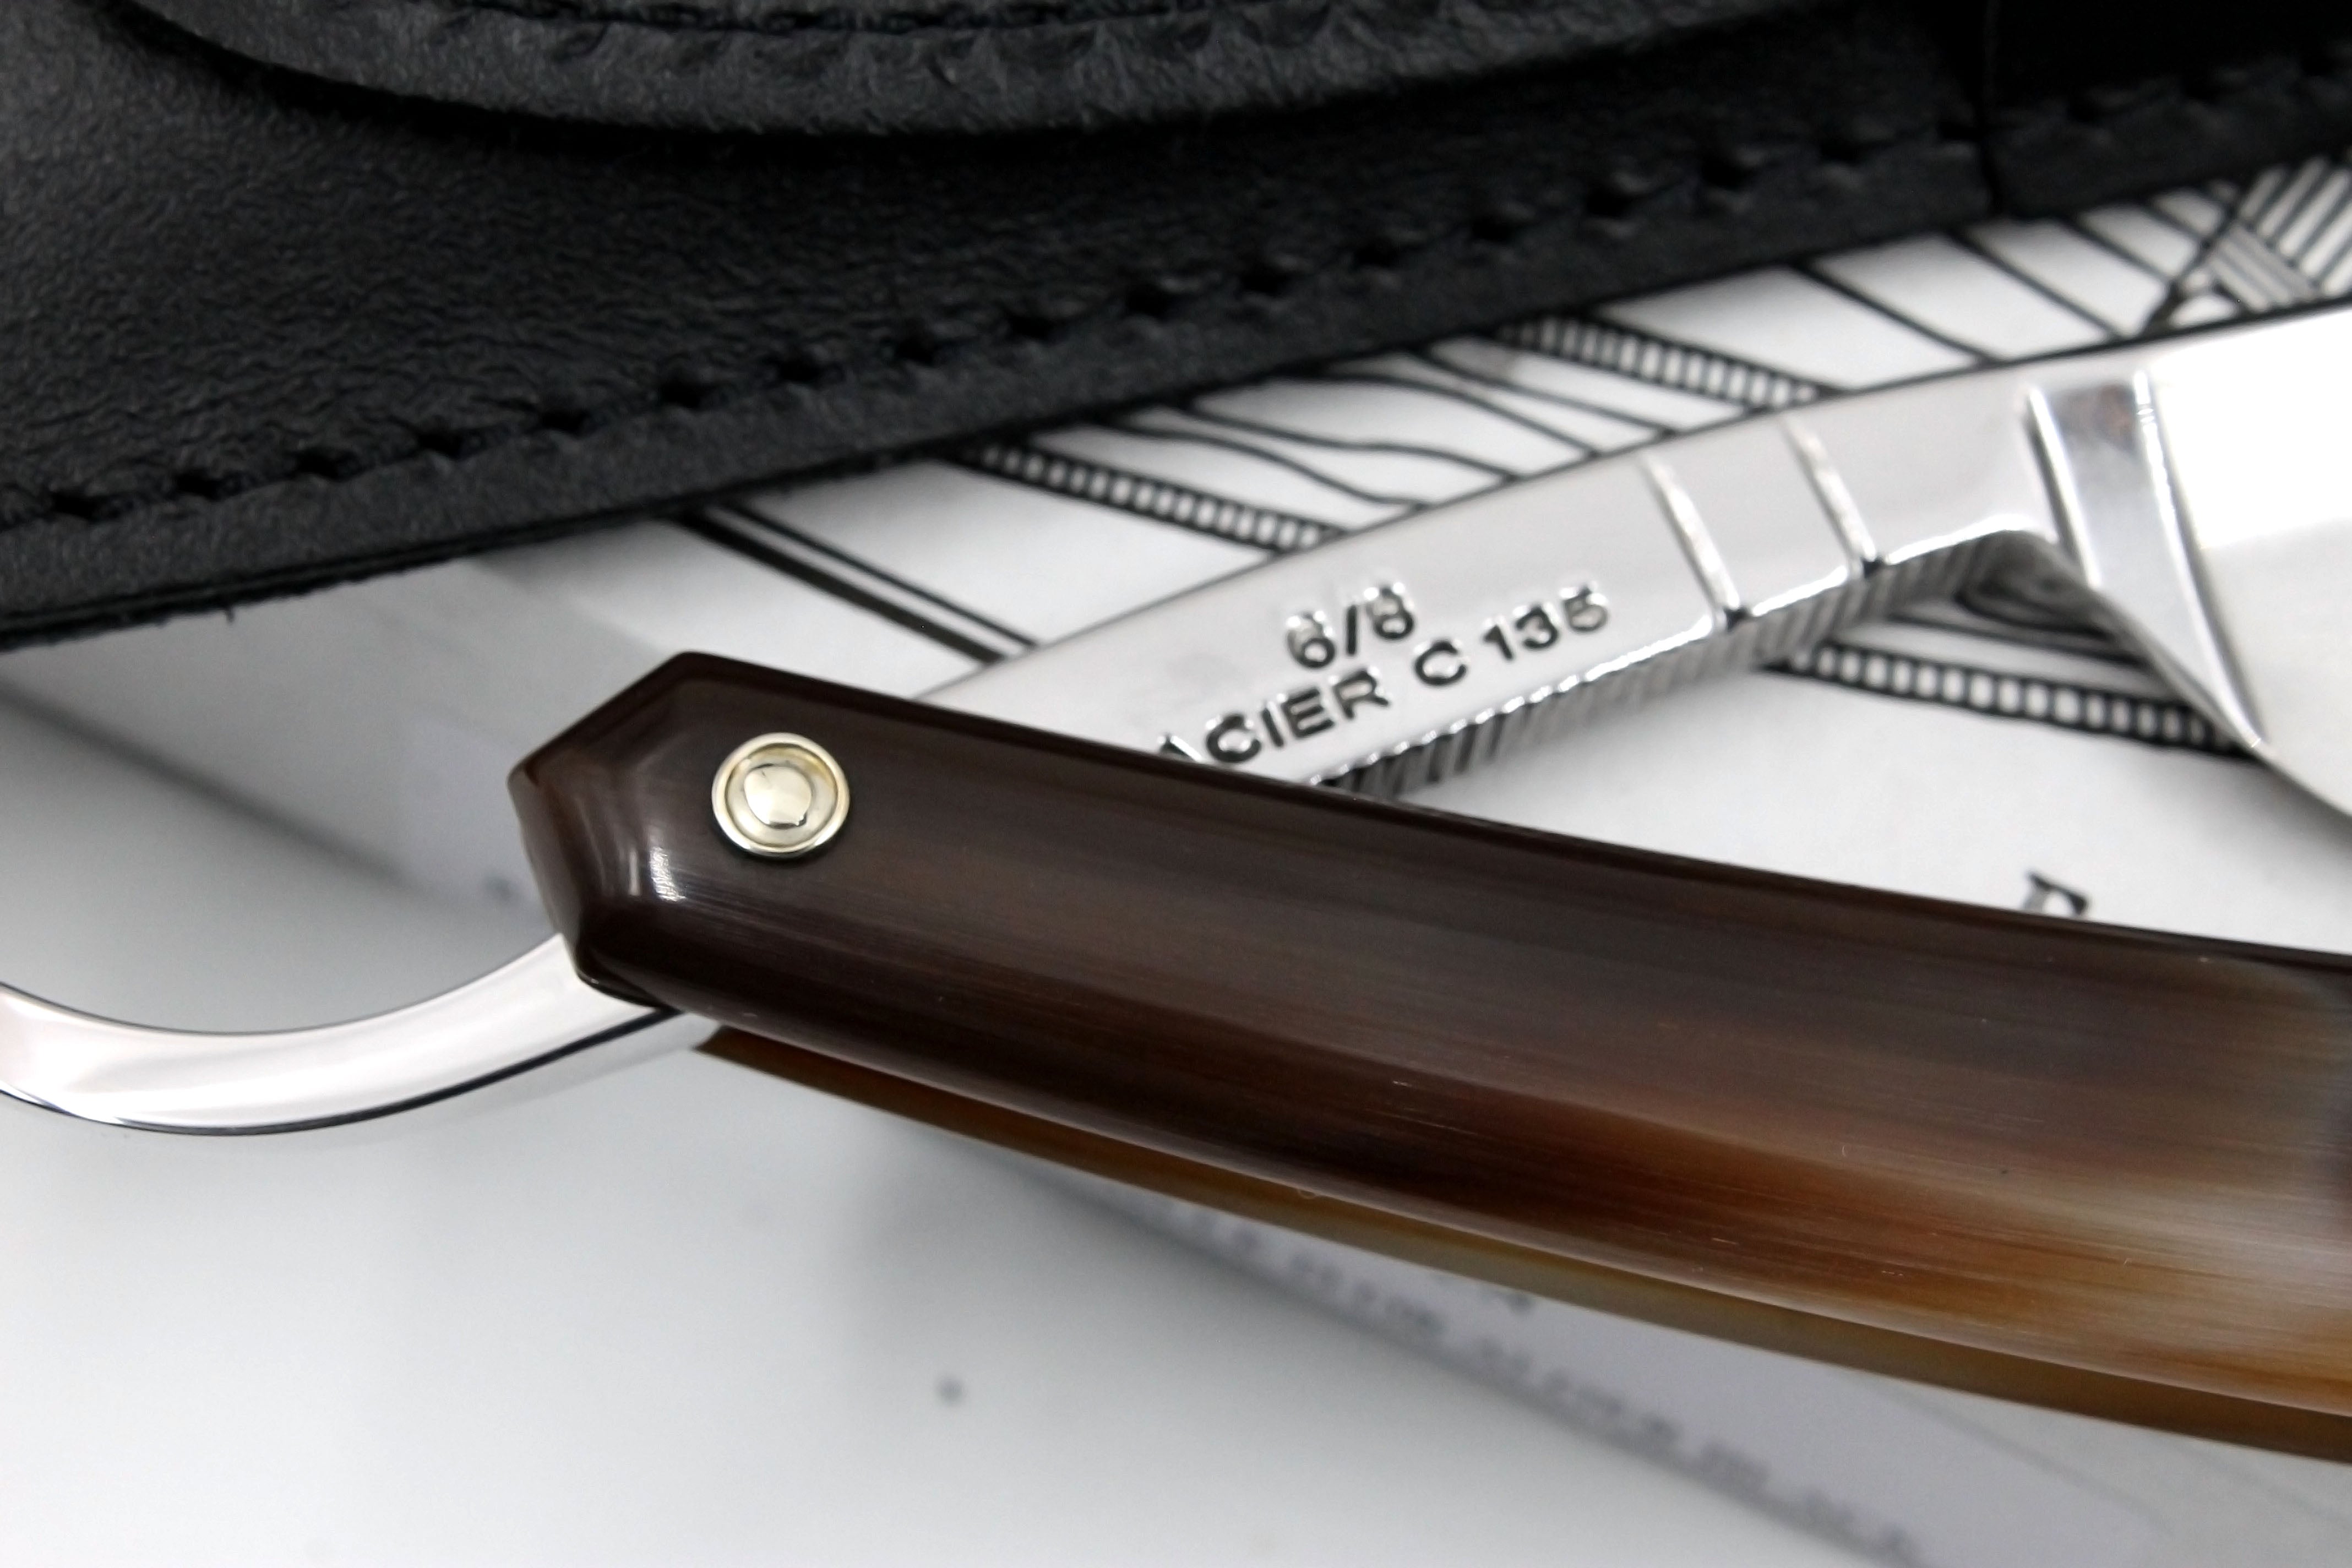 Thiers Issard 6/8 "Medaille d'or Alger" Etch - Blonde Horn Scales - Full Hollow Straight Razor